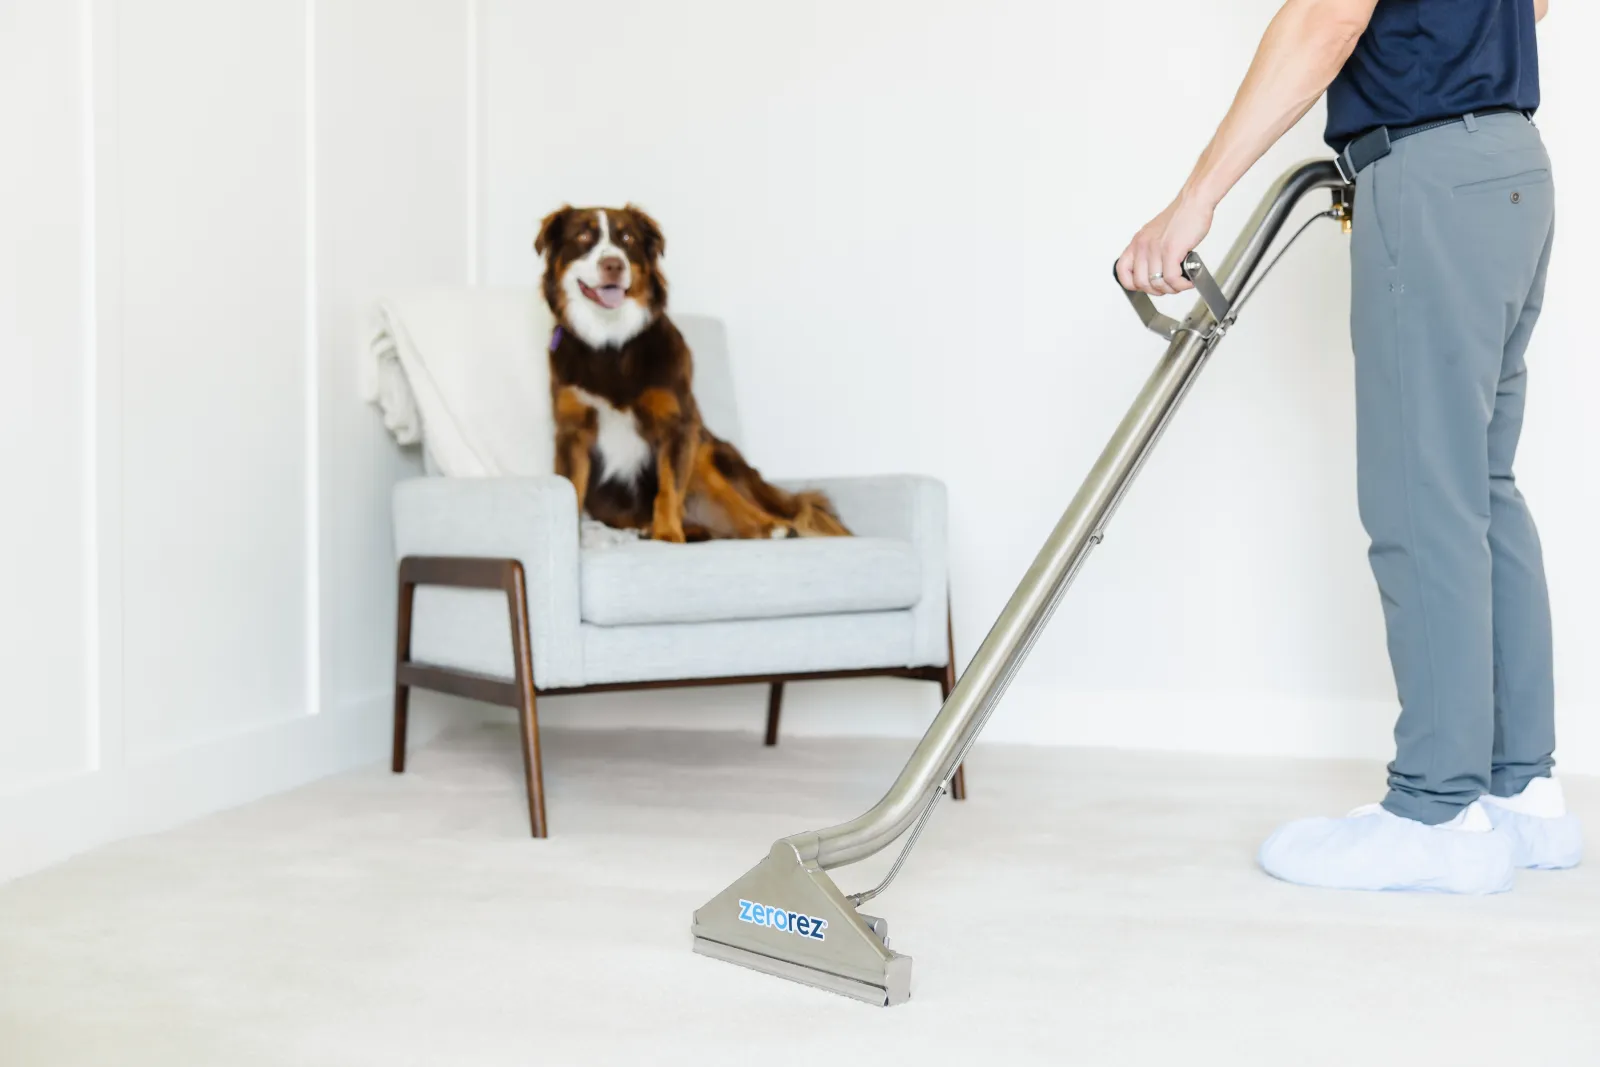 Zerorez® Zr Wand extracting carpeting while a furry dog sits in an upholstered chair in the background